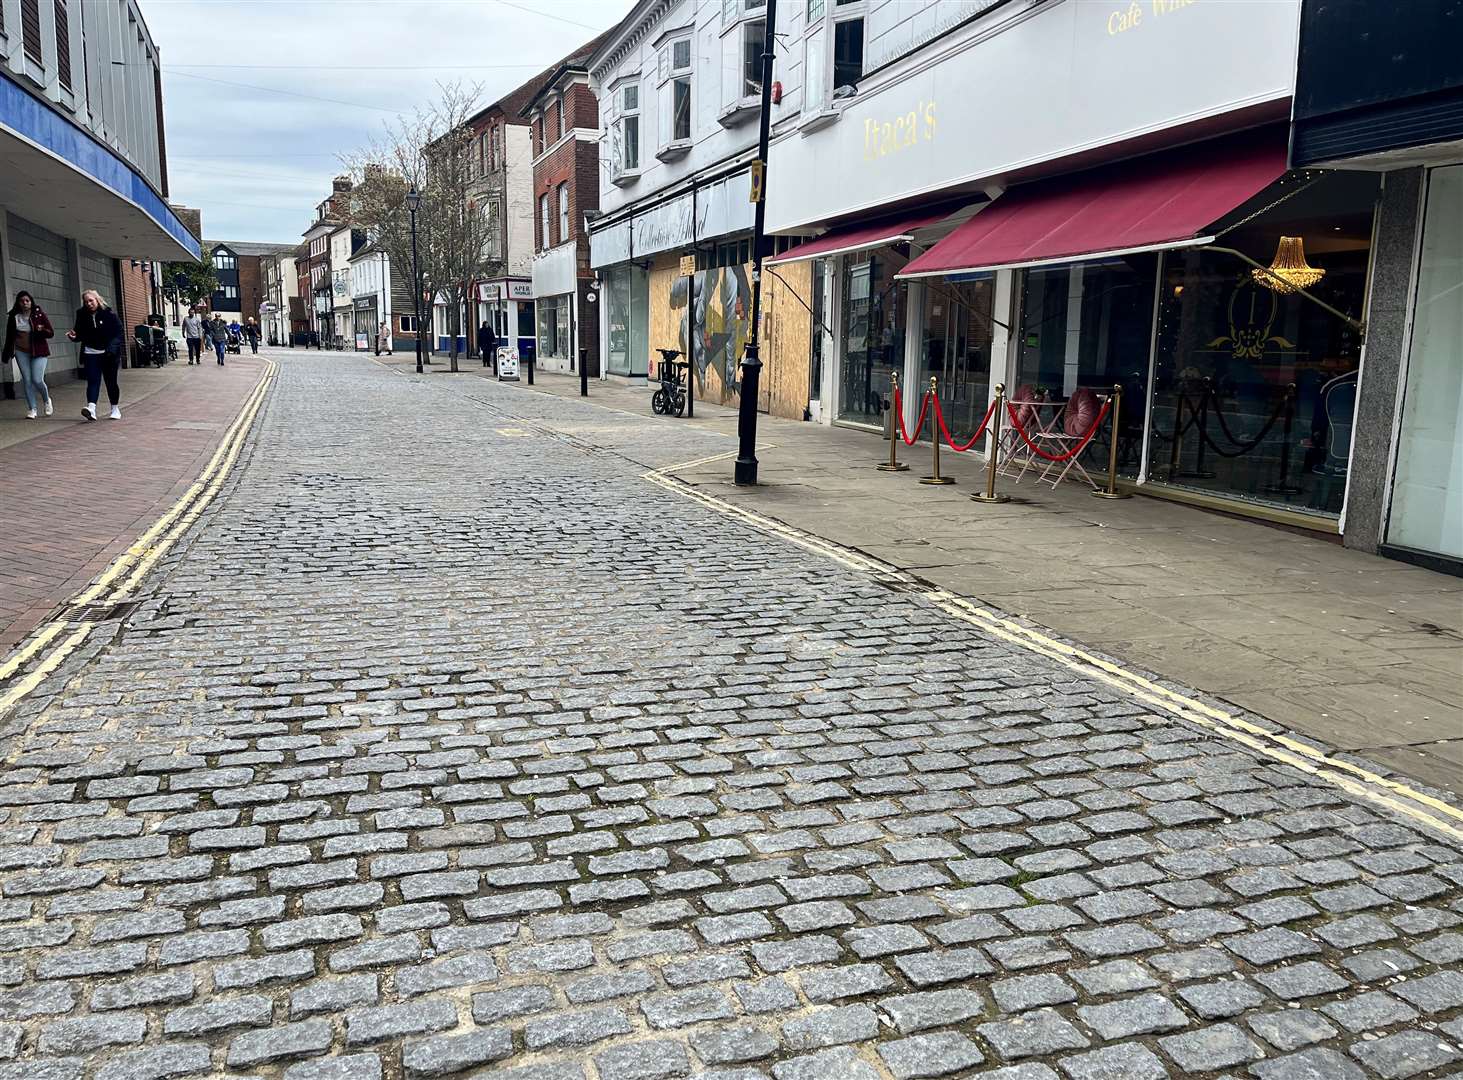 Cobbles remain in North Street, next to the Lower High Street